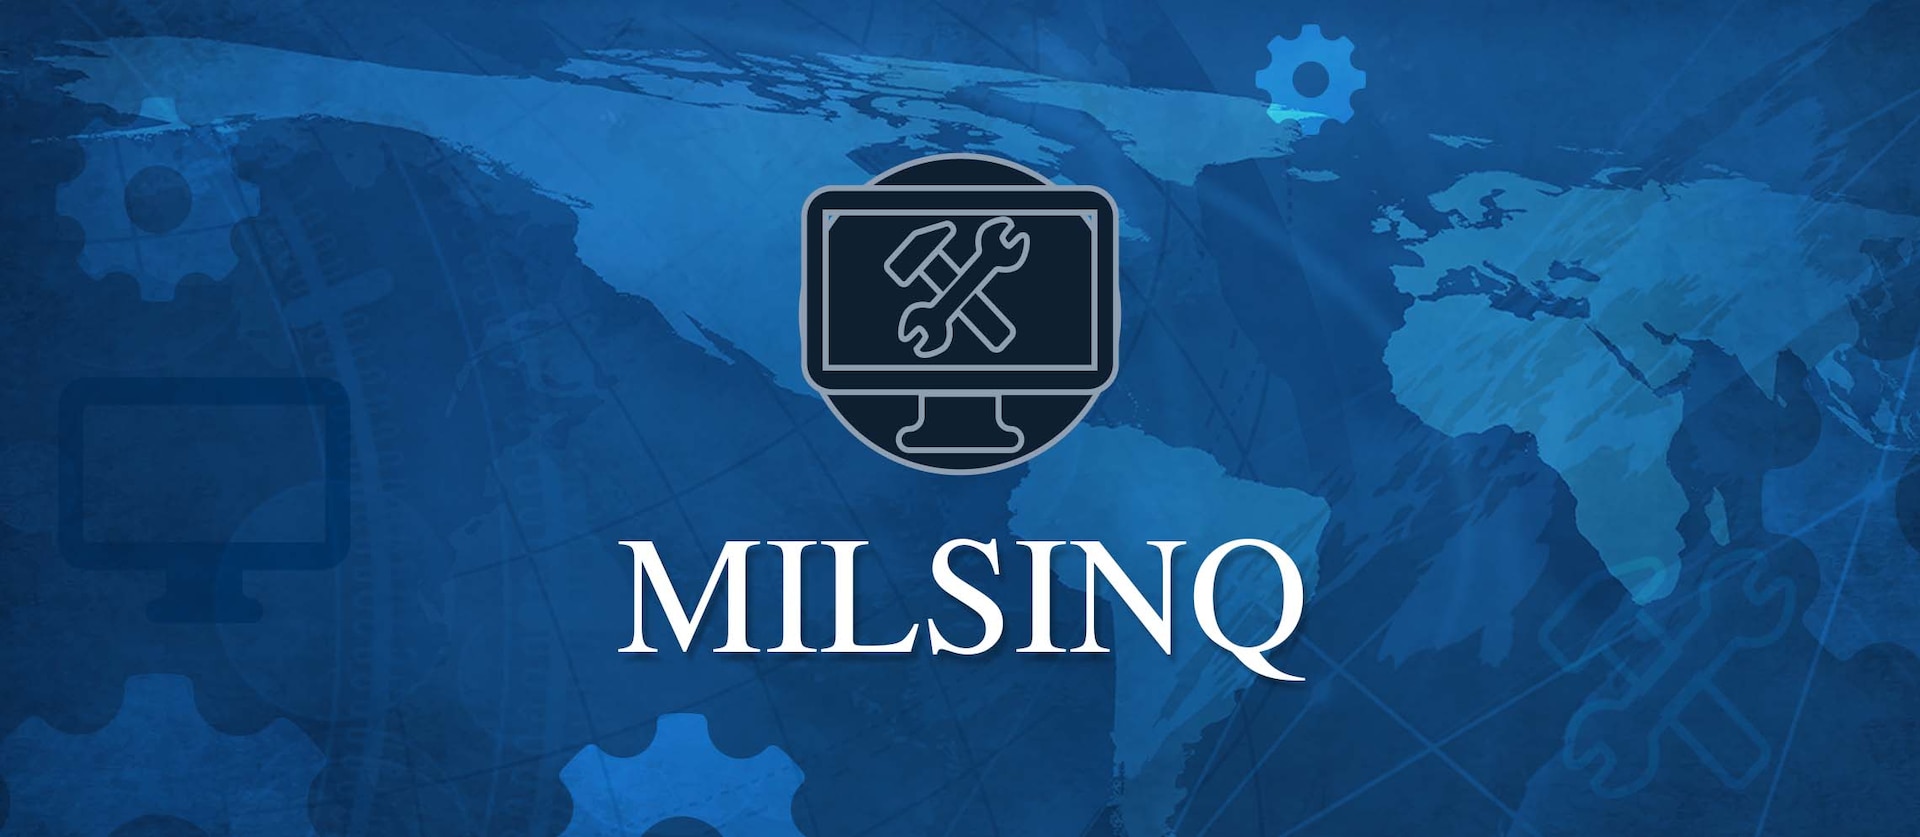 Graphic for MILSINQ application